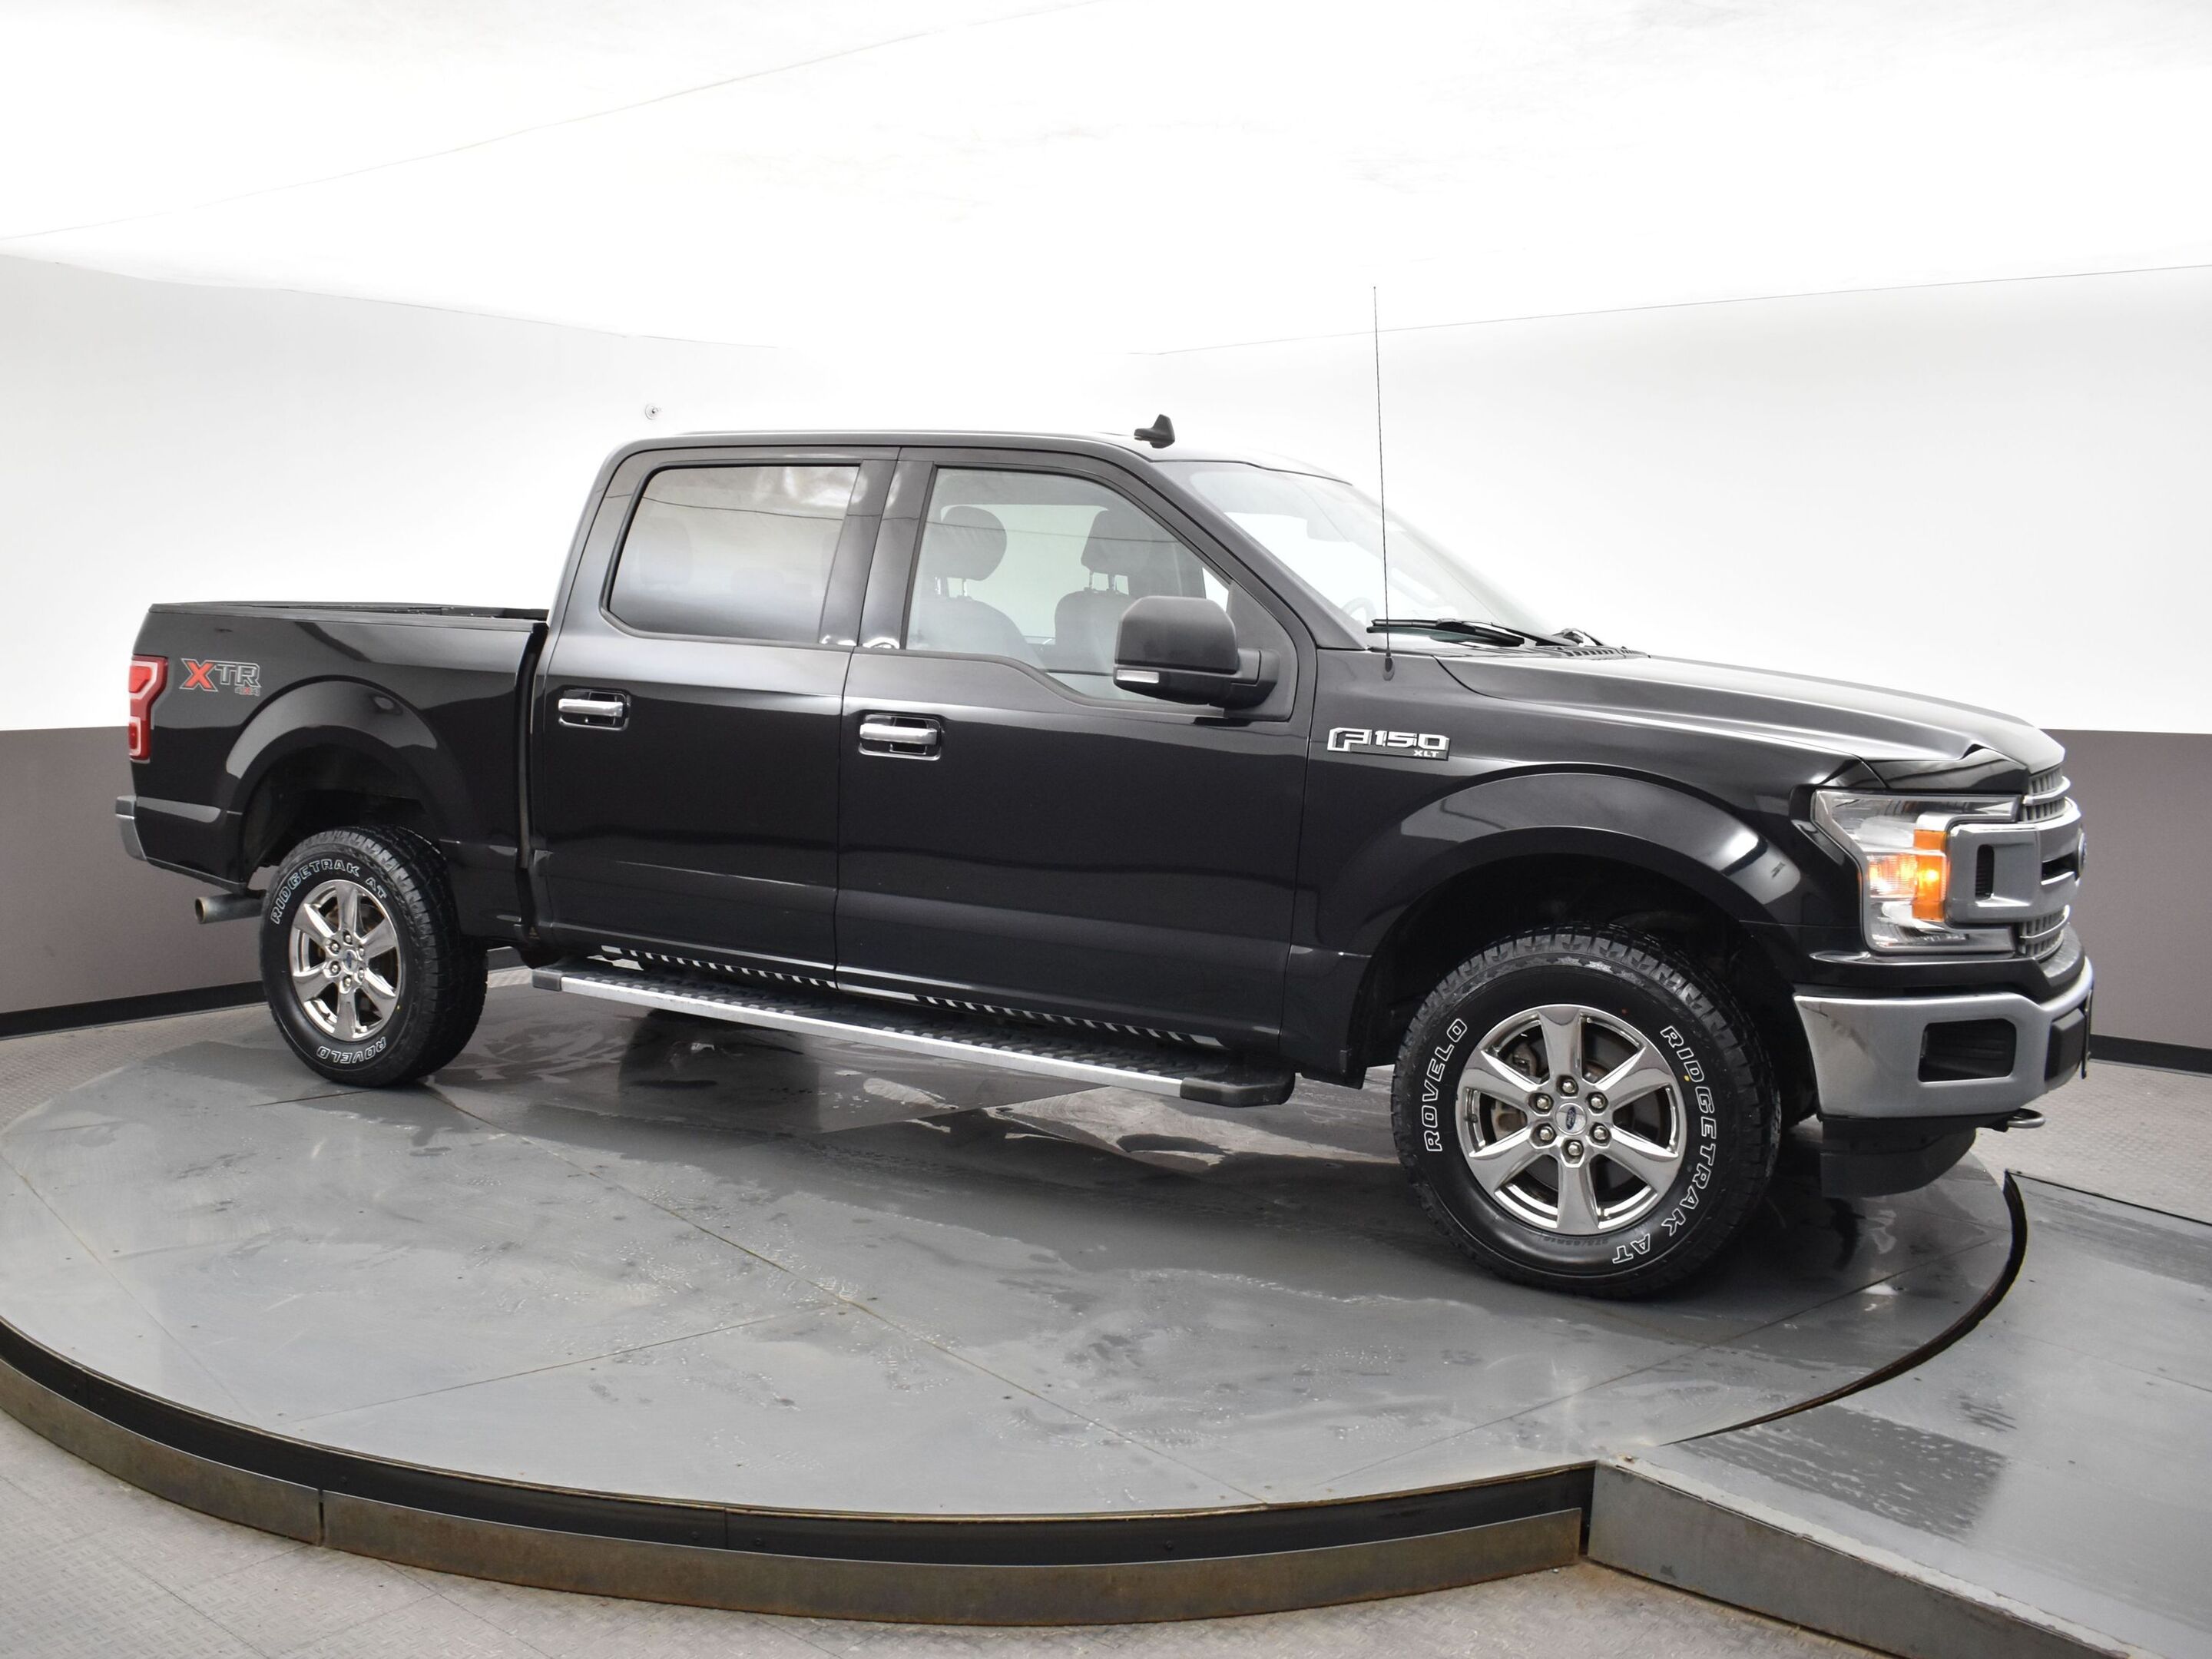 2019 Ford F-150 XLT XLT WITH 4X4, TRAILER HITCH, TOW HOOKS, SMARTP